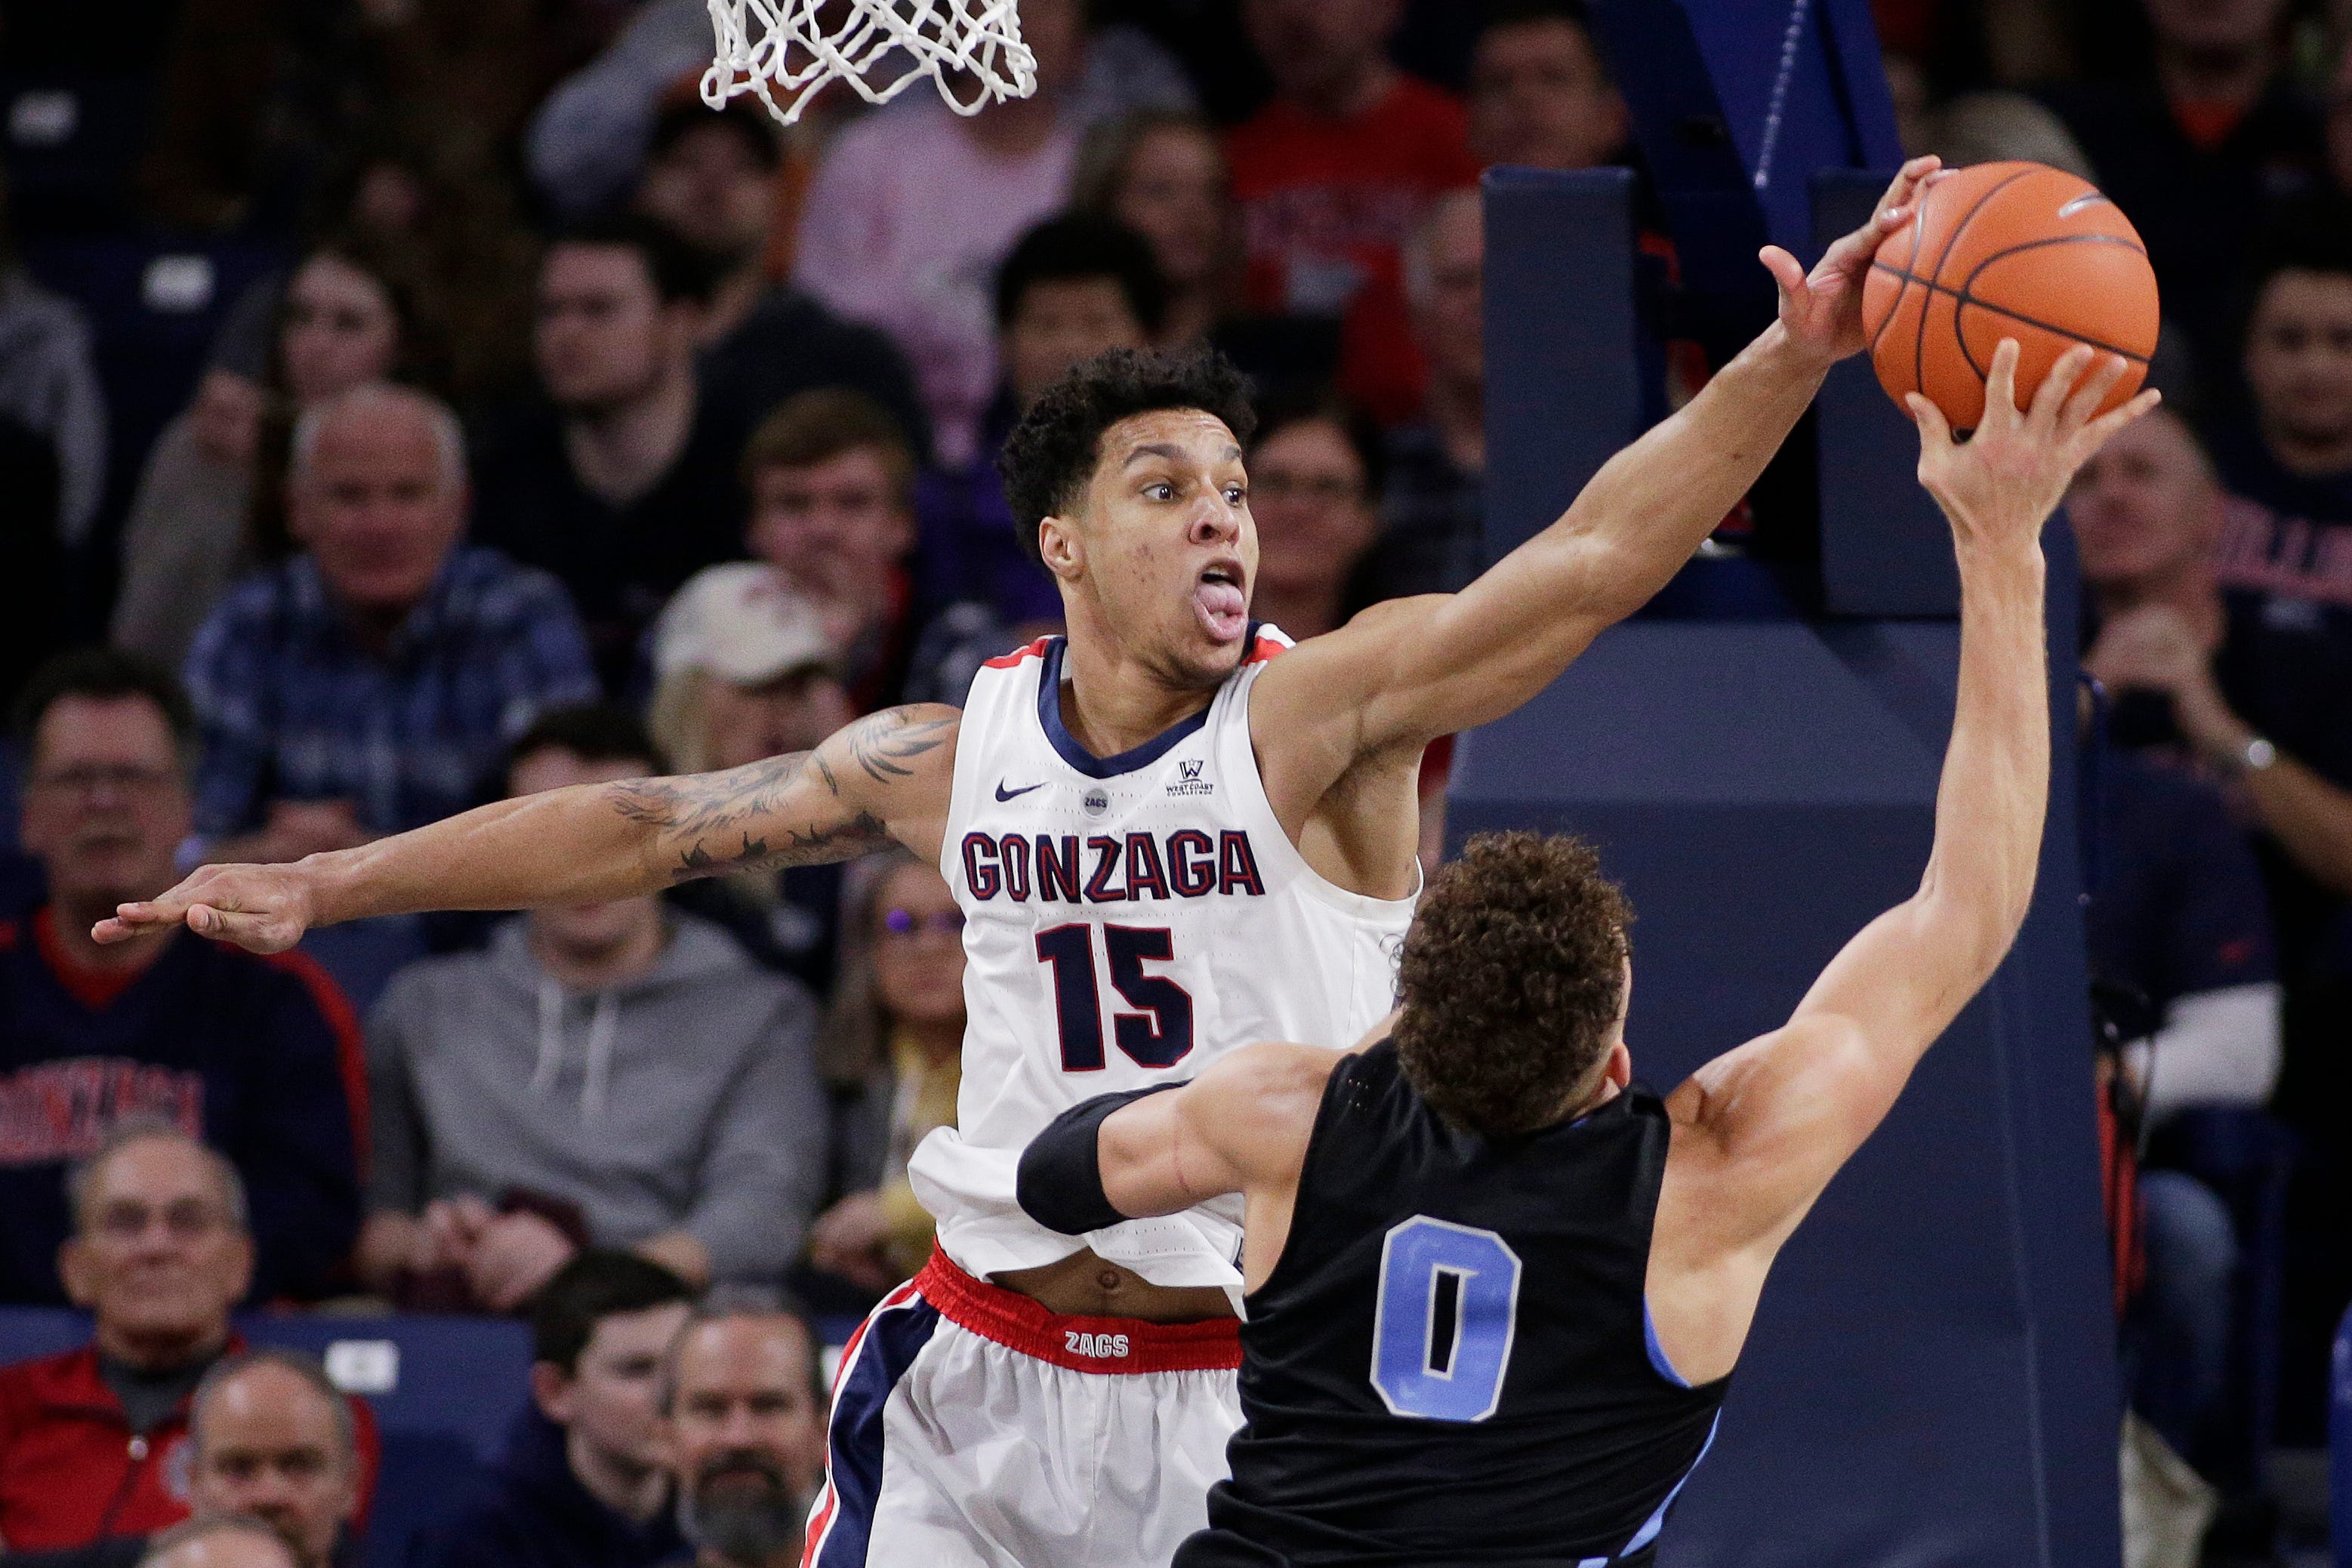 11. Minnesota Timberwolves: Brandon Clarke, F, Gonzaga. The Timberwolves won’t find a suitable option with the crop of point guards, but they can use a big forward such as Clarke, PJ Washington or Rui Hachimura at this spot. Give the nod to Clarke, who brings some needed defensive presence.